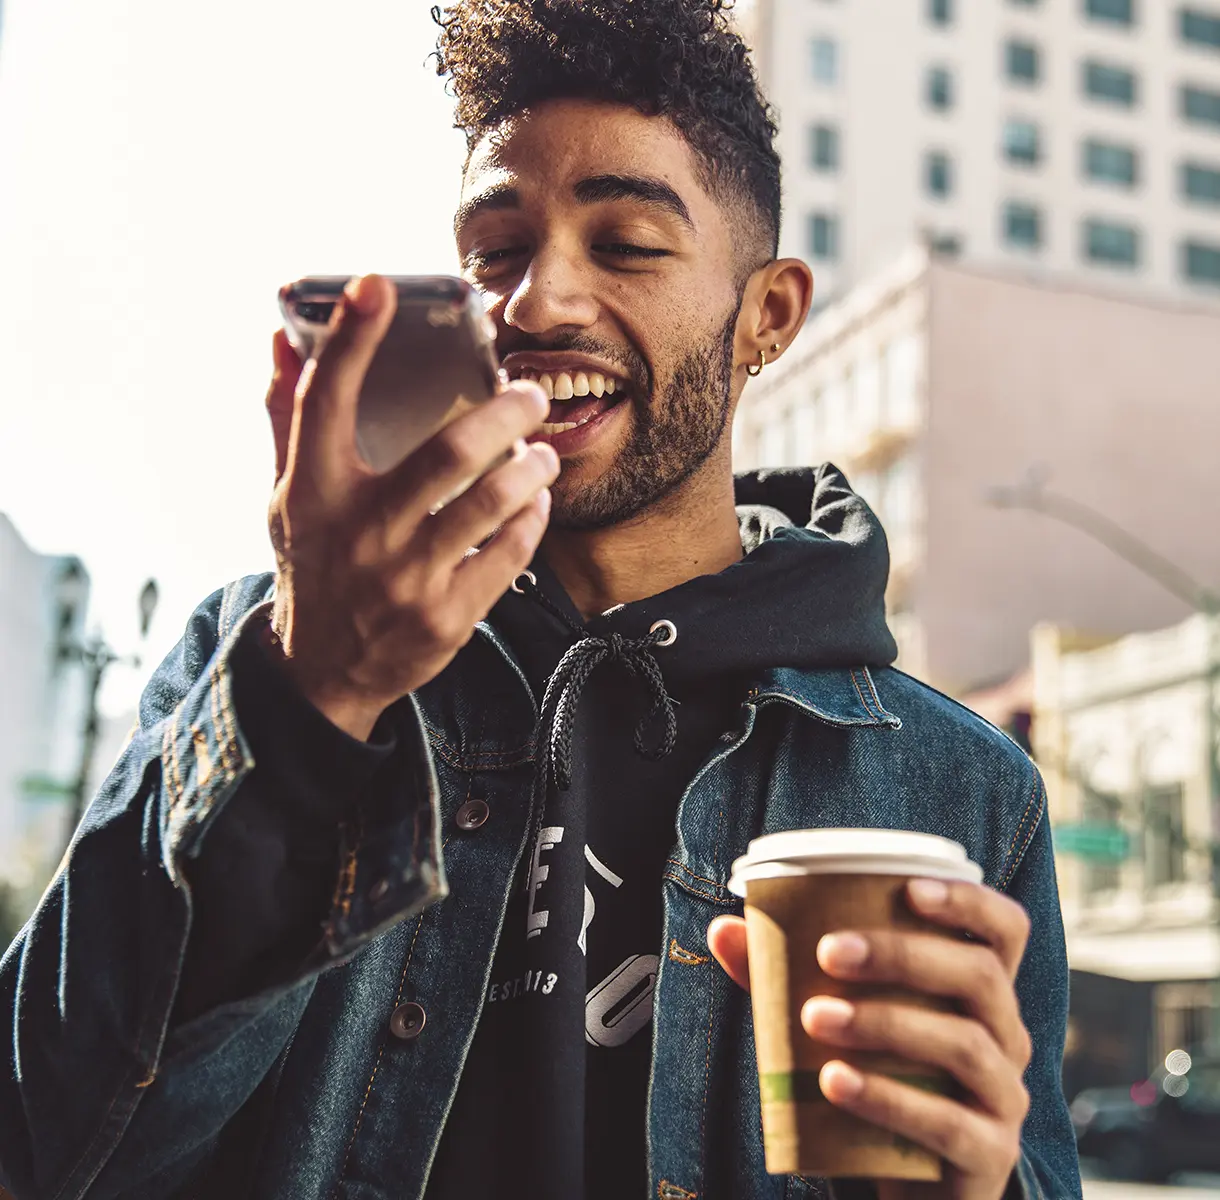 Man holding coffee while on phone